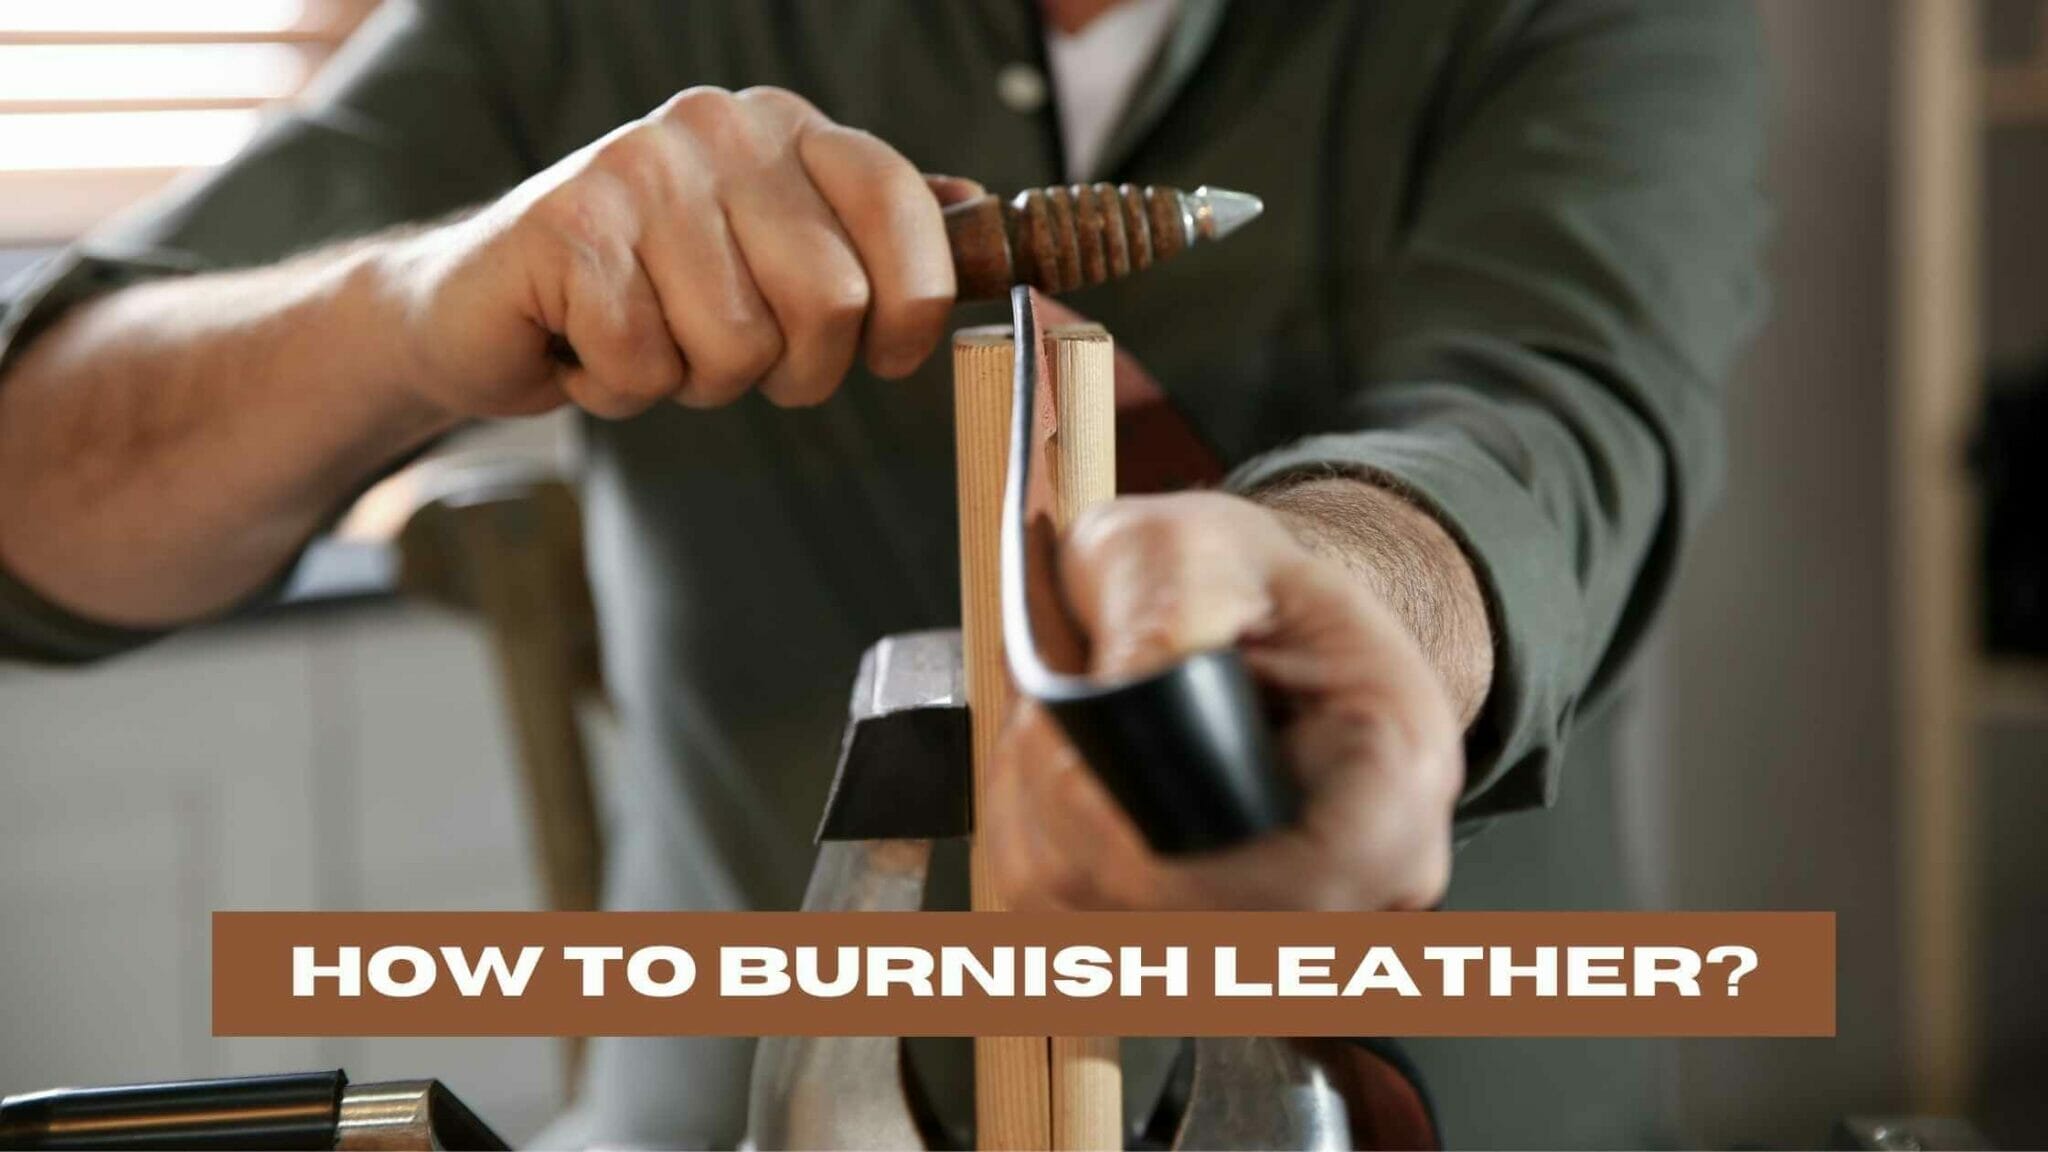 How to Burnish Leather? (A Step-by-Step Guide)